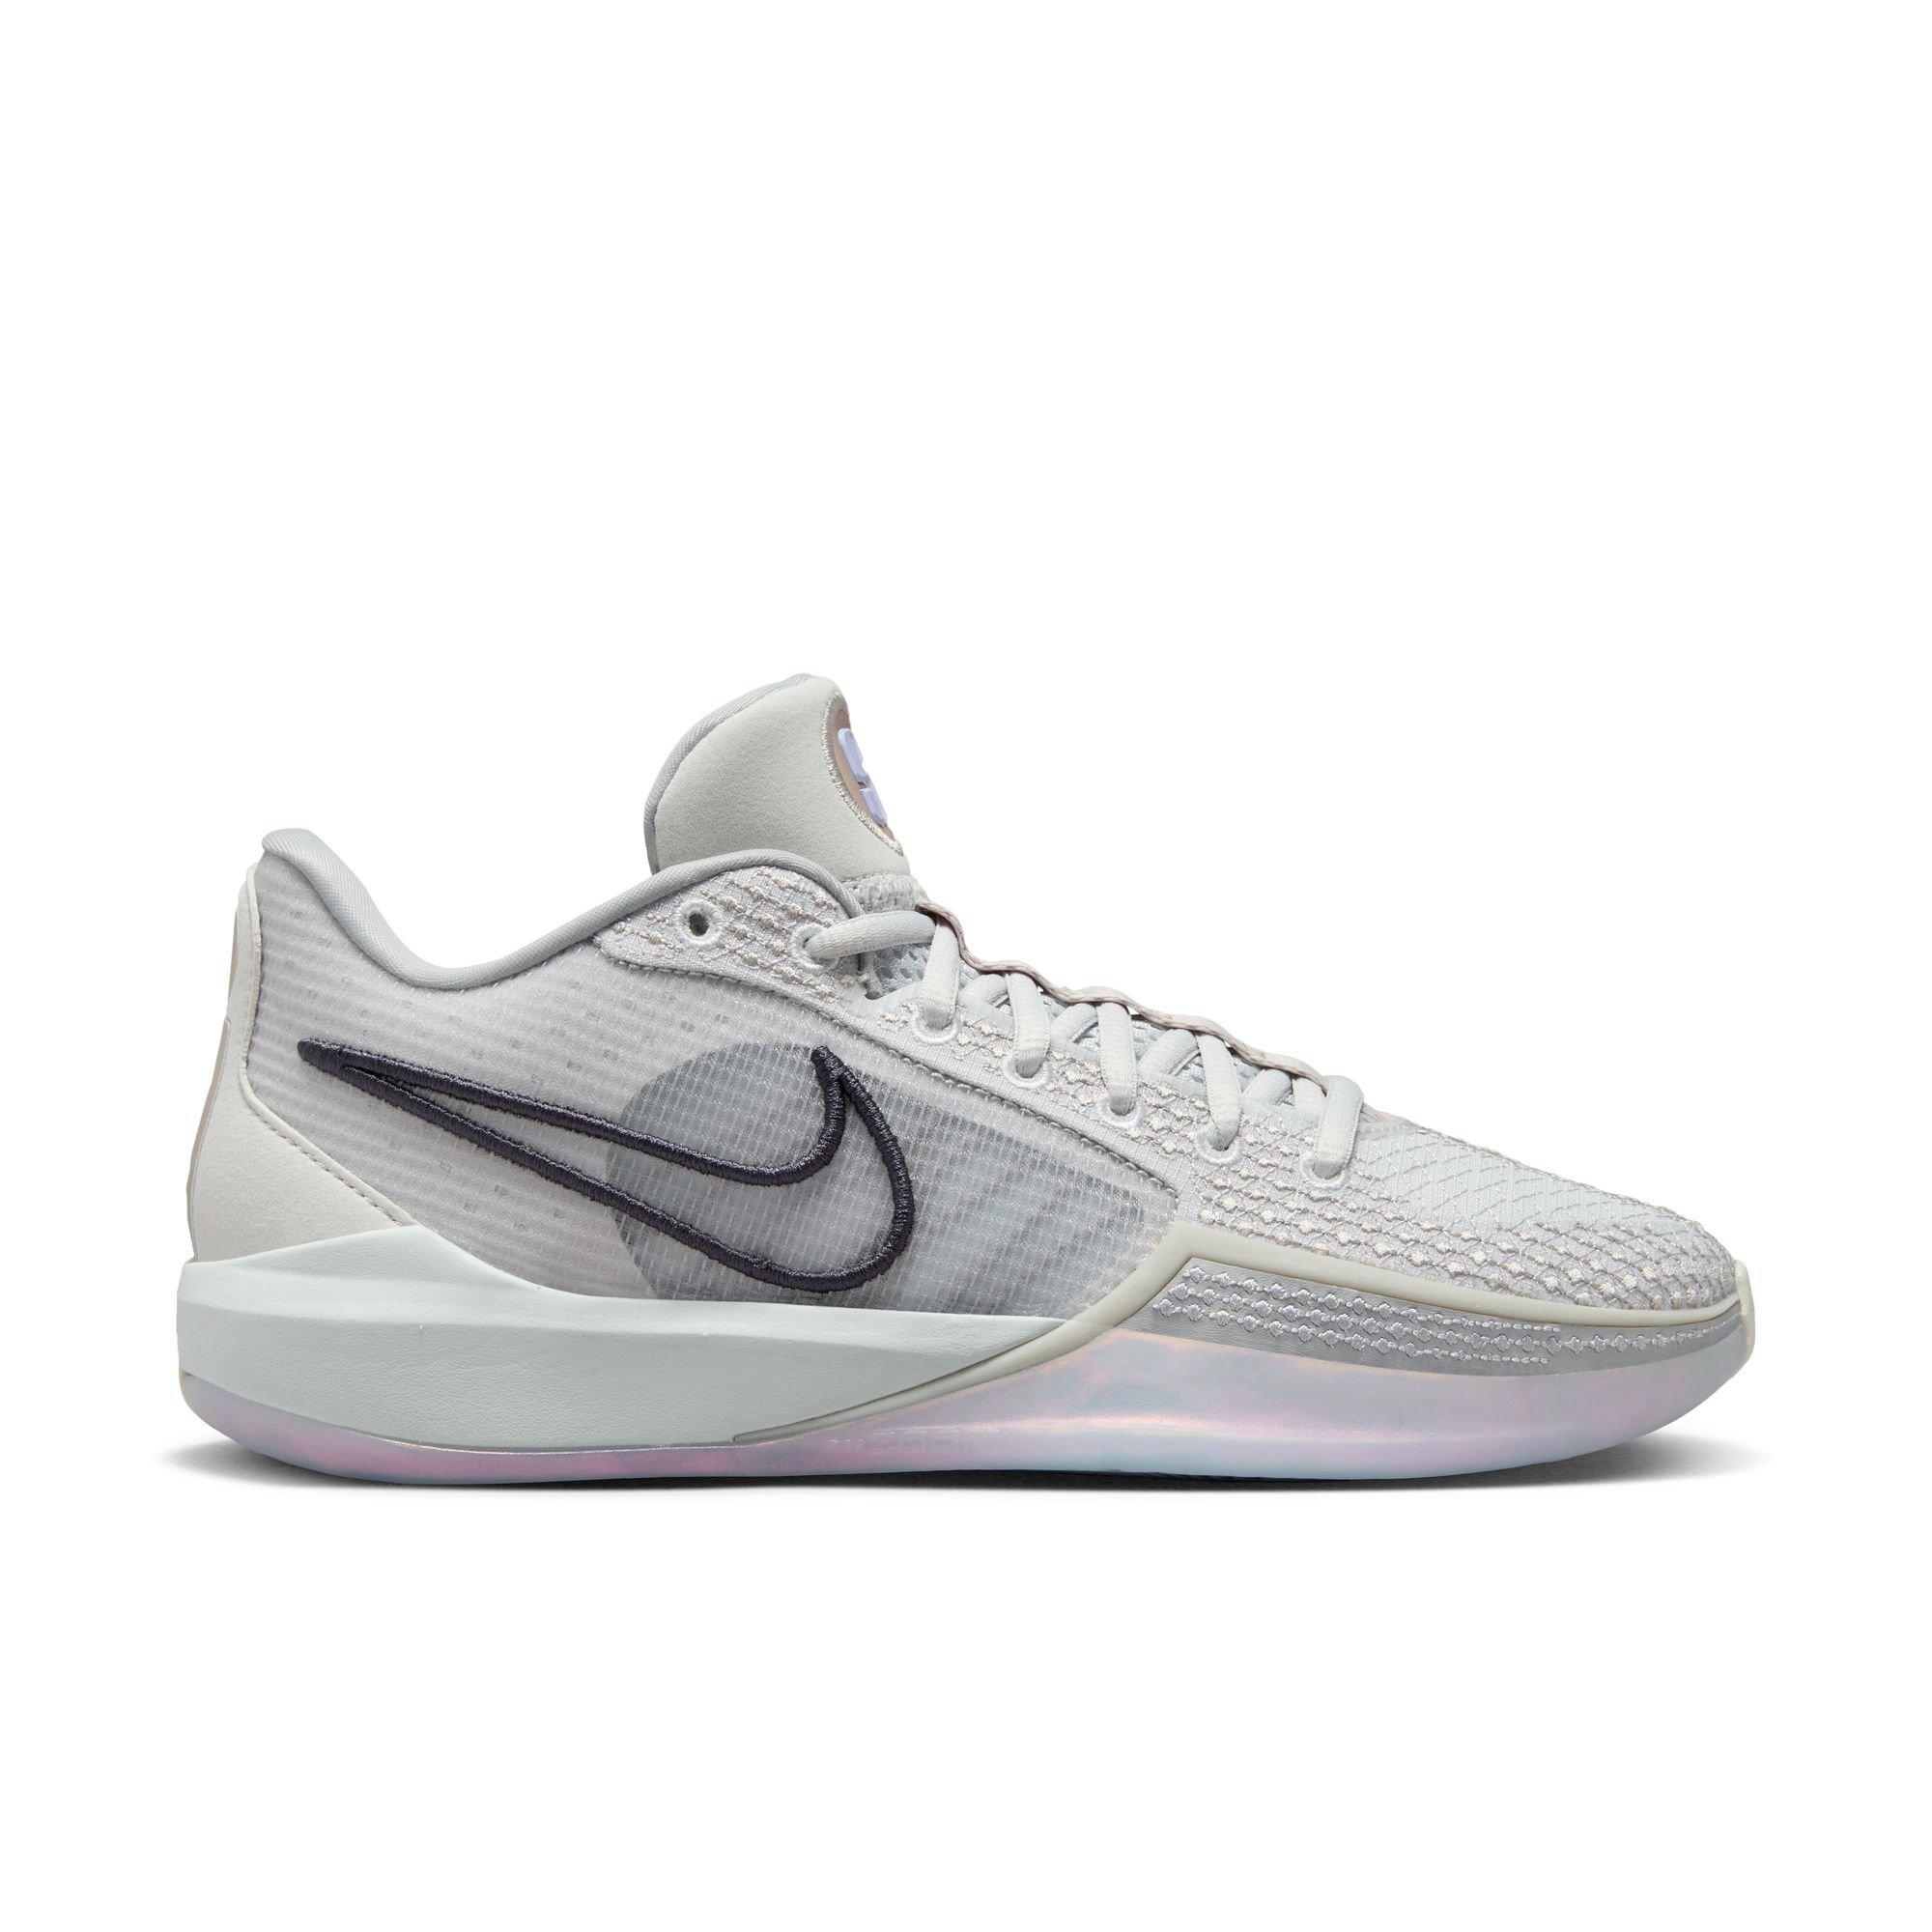 Sabrina Ionescu Shoes - 2023 Release Dates + Prices